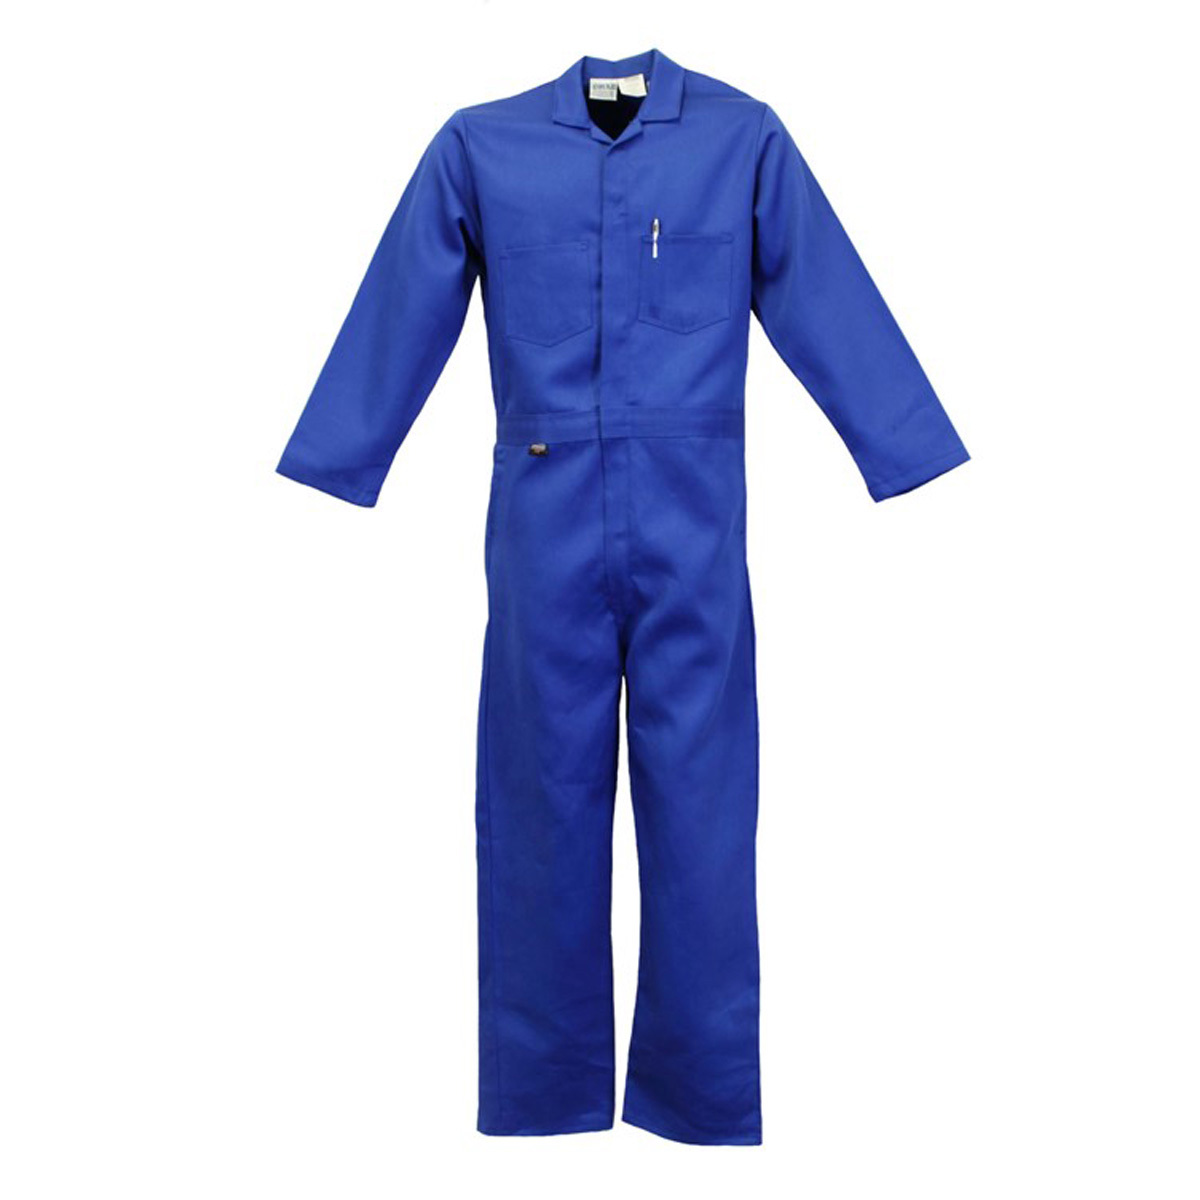 Stanco Safety Products™ Size 4X Royal Blue Indura® Arc Rated Flame Resistant Coveralls With Front Zipper Closure